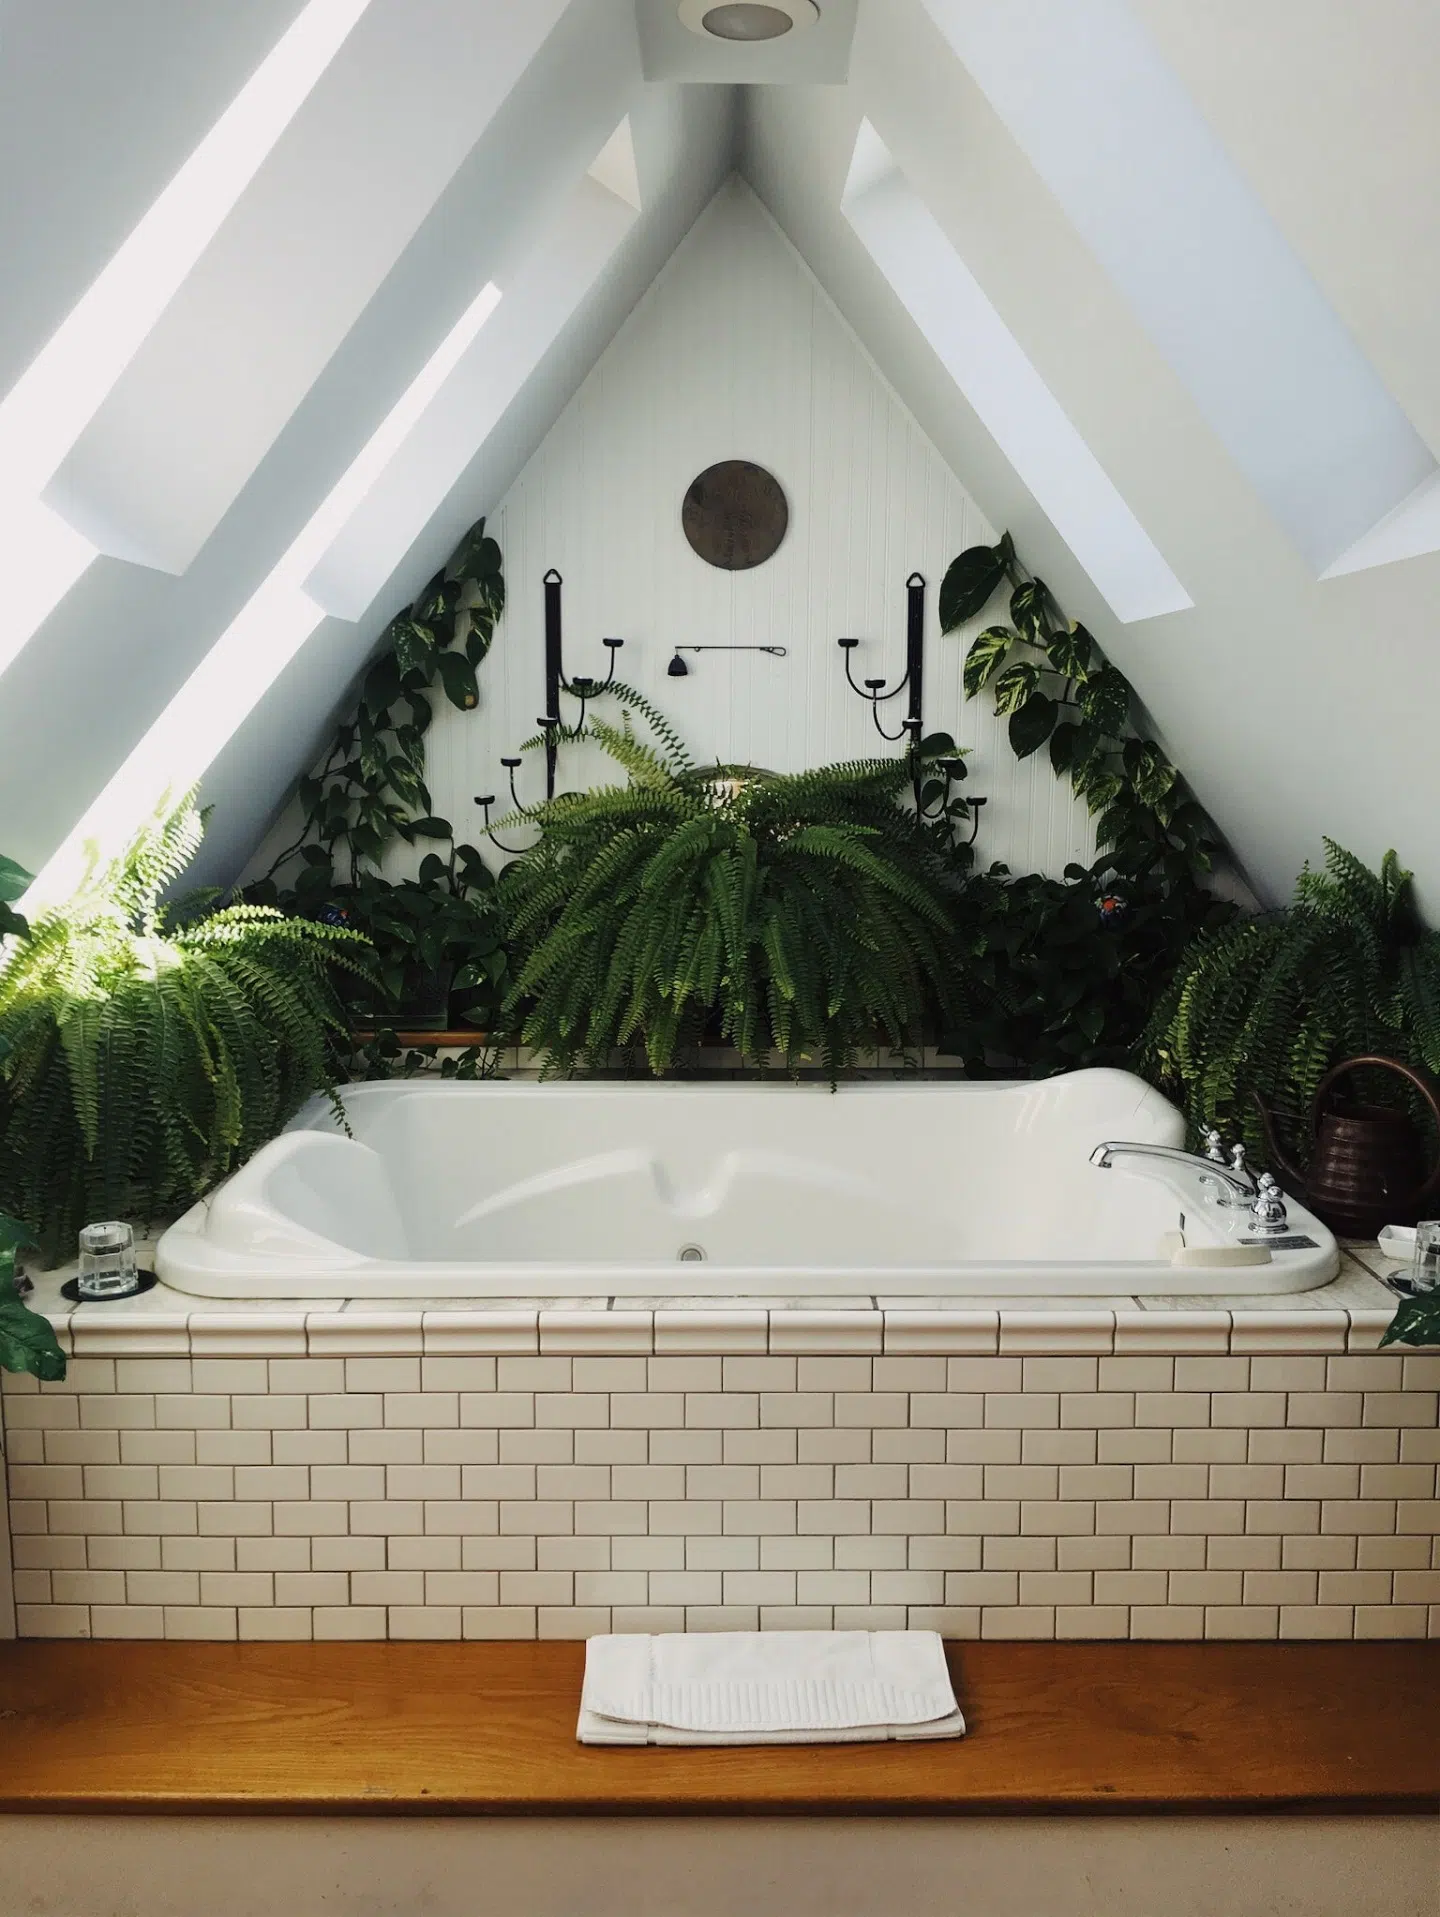 Natural Light Magic: Skylights and Windows in Attic Bathrooms